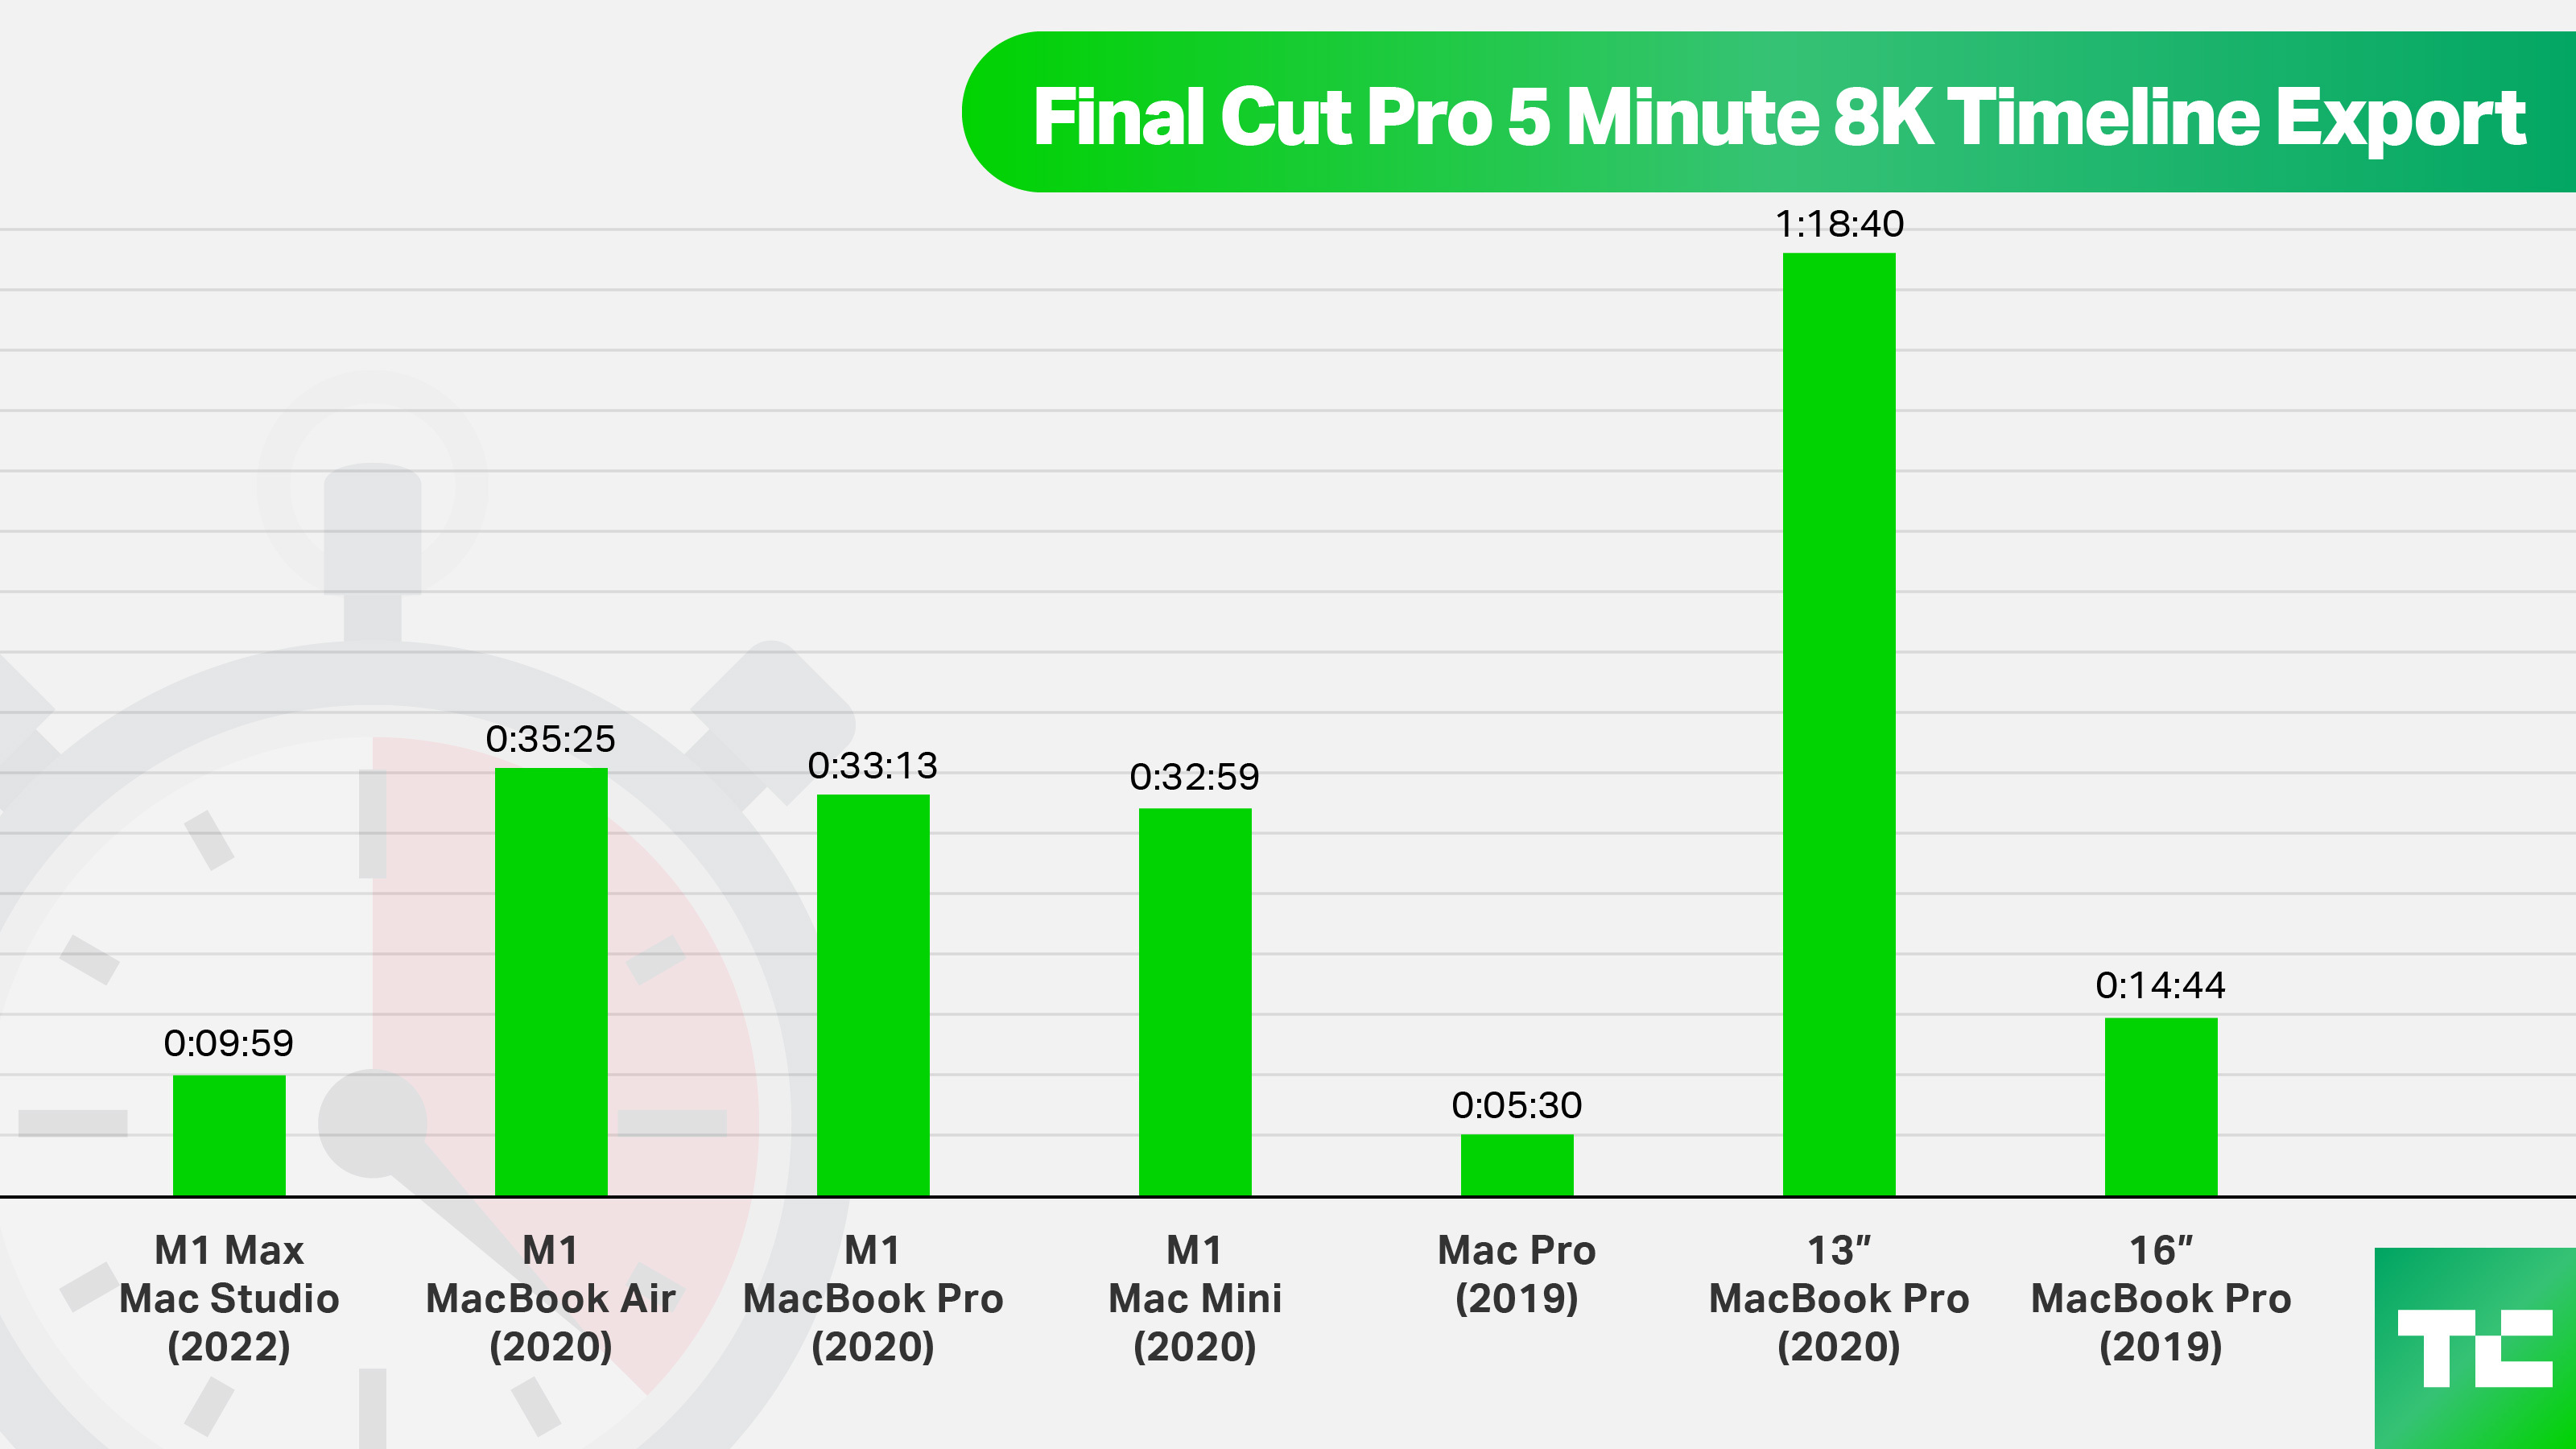 M1 Max Mac Studio 2022 time on Final Cut Pro 5 Minute export, compared to past Apple Mac releases